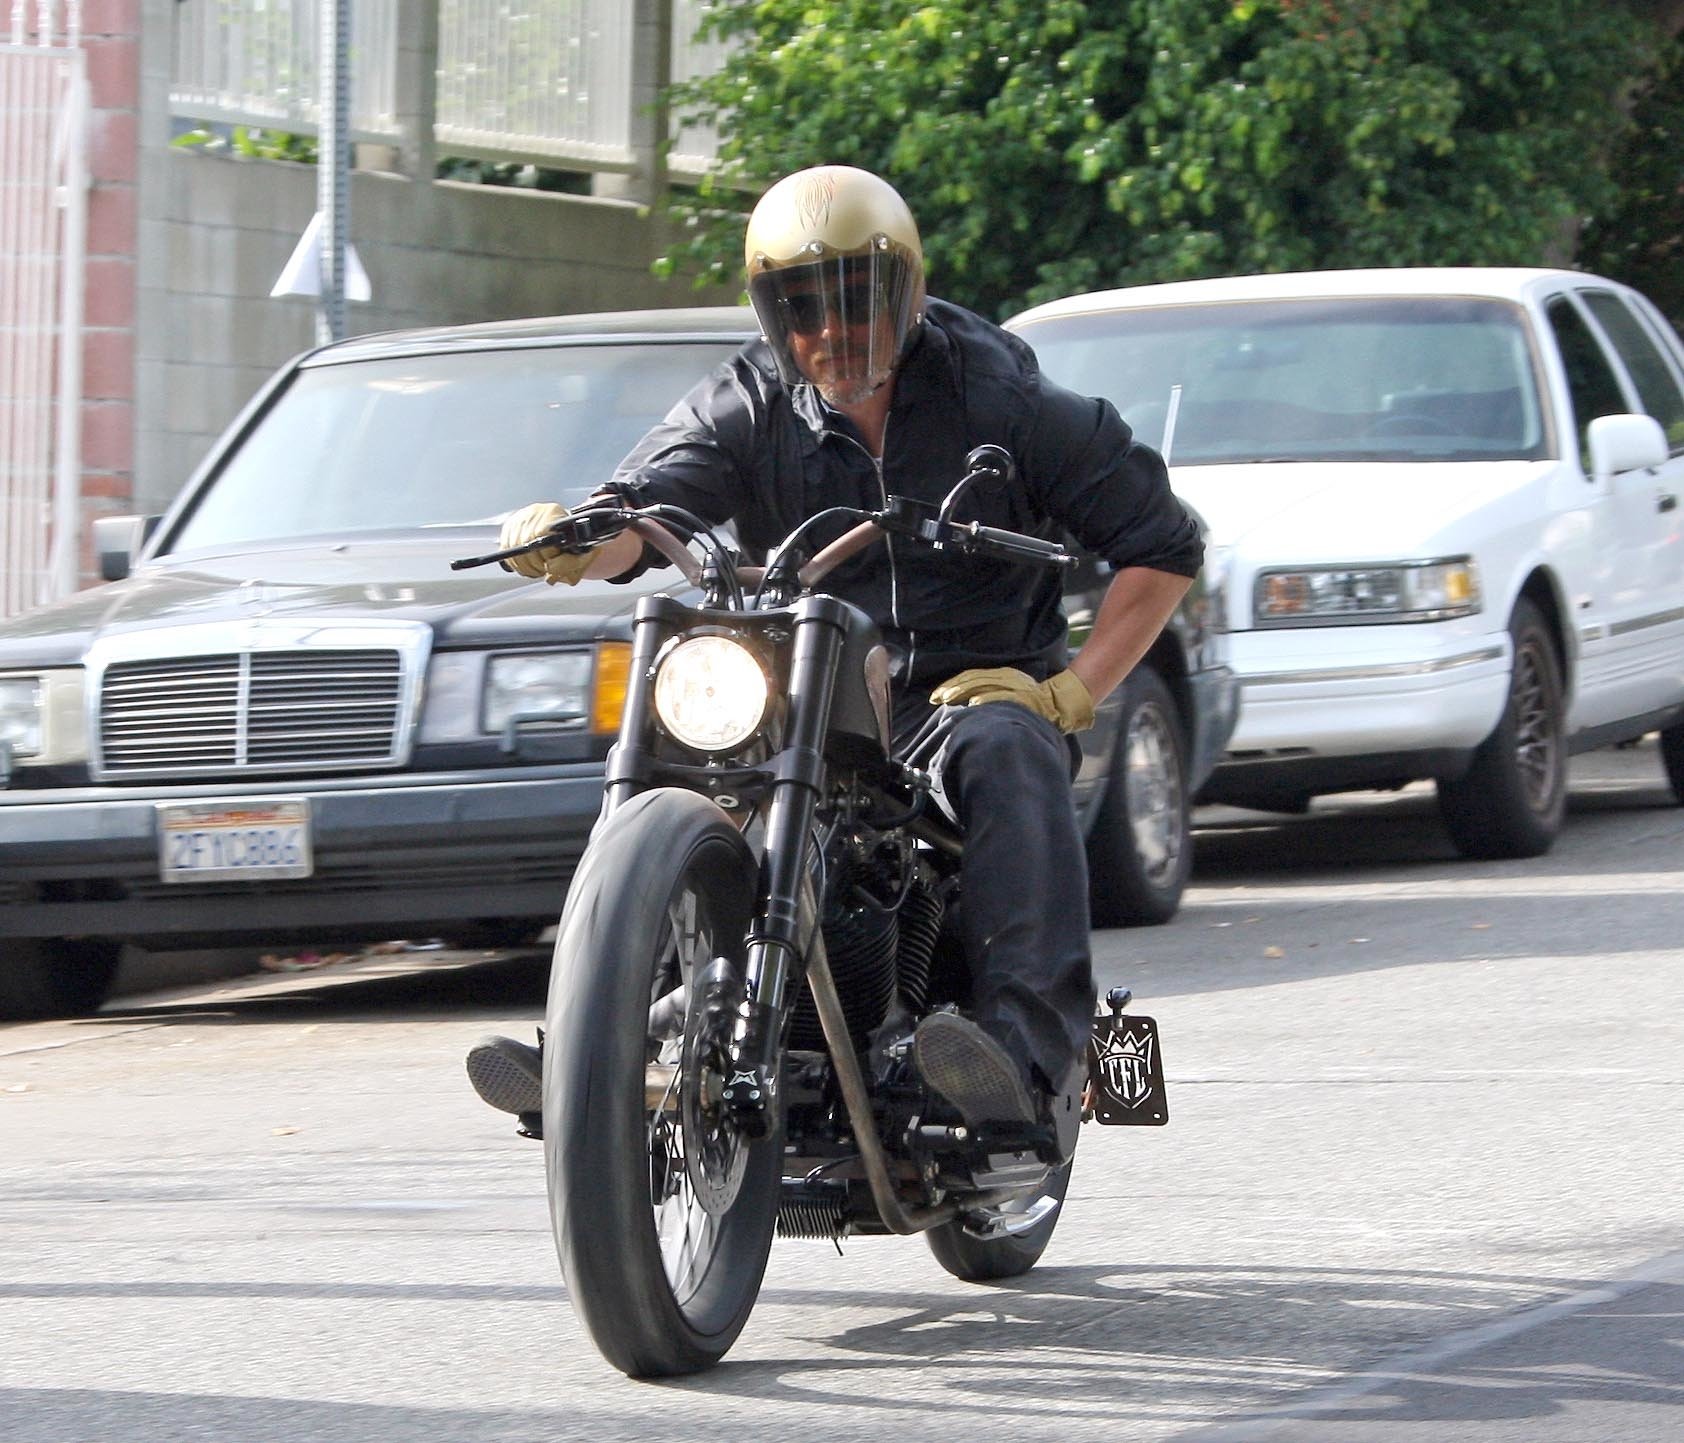 Brad Pitt's $300k Motorcycle Is One of the Most Powerful Bikes in the World